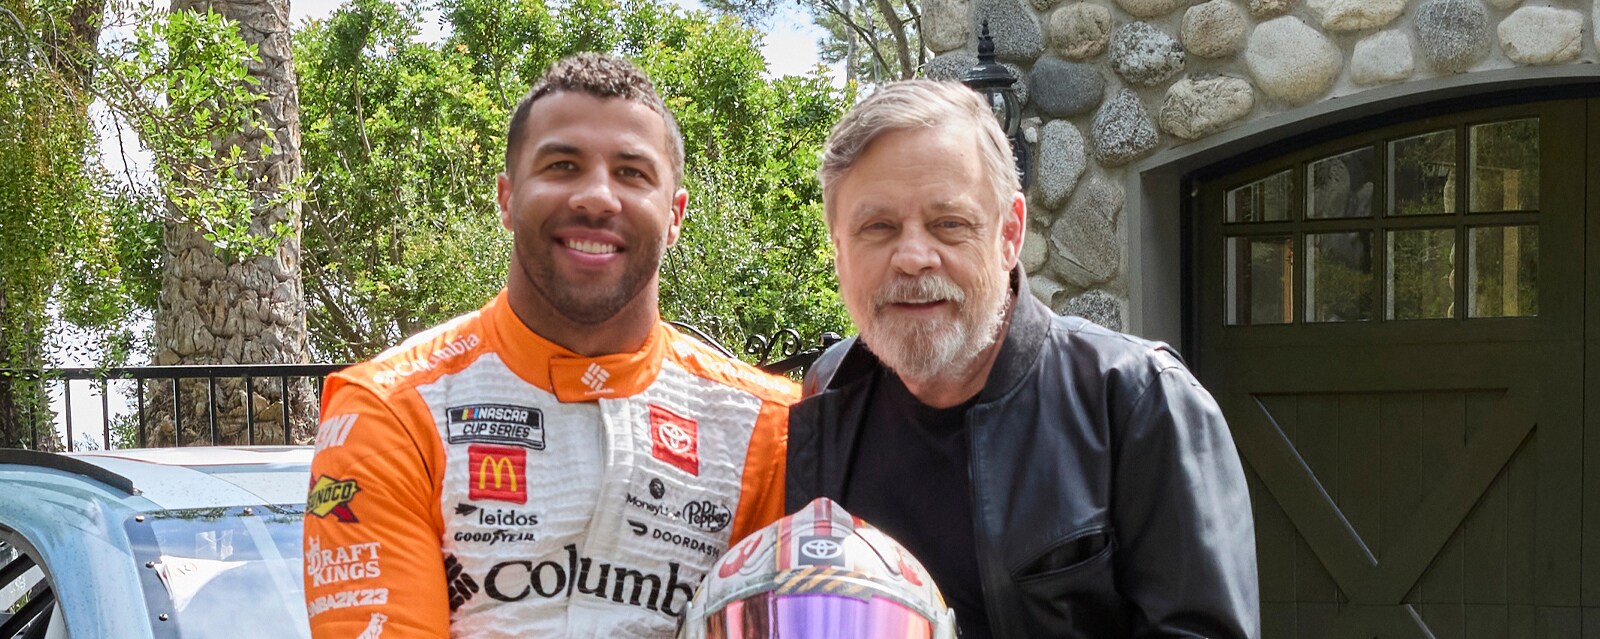 Mark Hamill and Bubba Wallace holding a Columbia X-wing helmet.